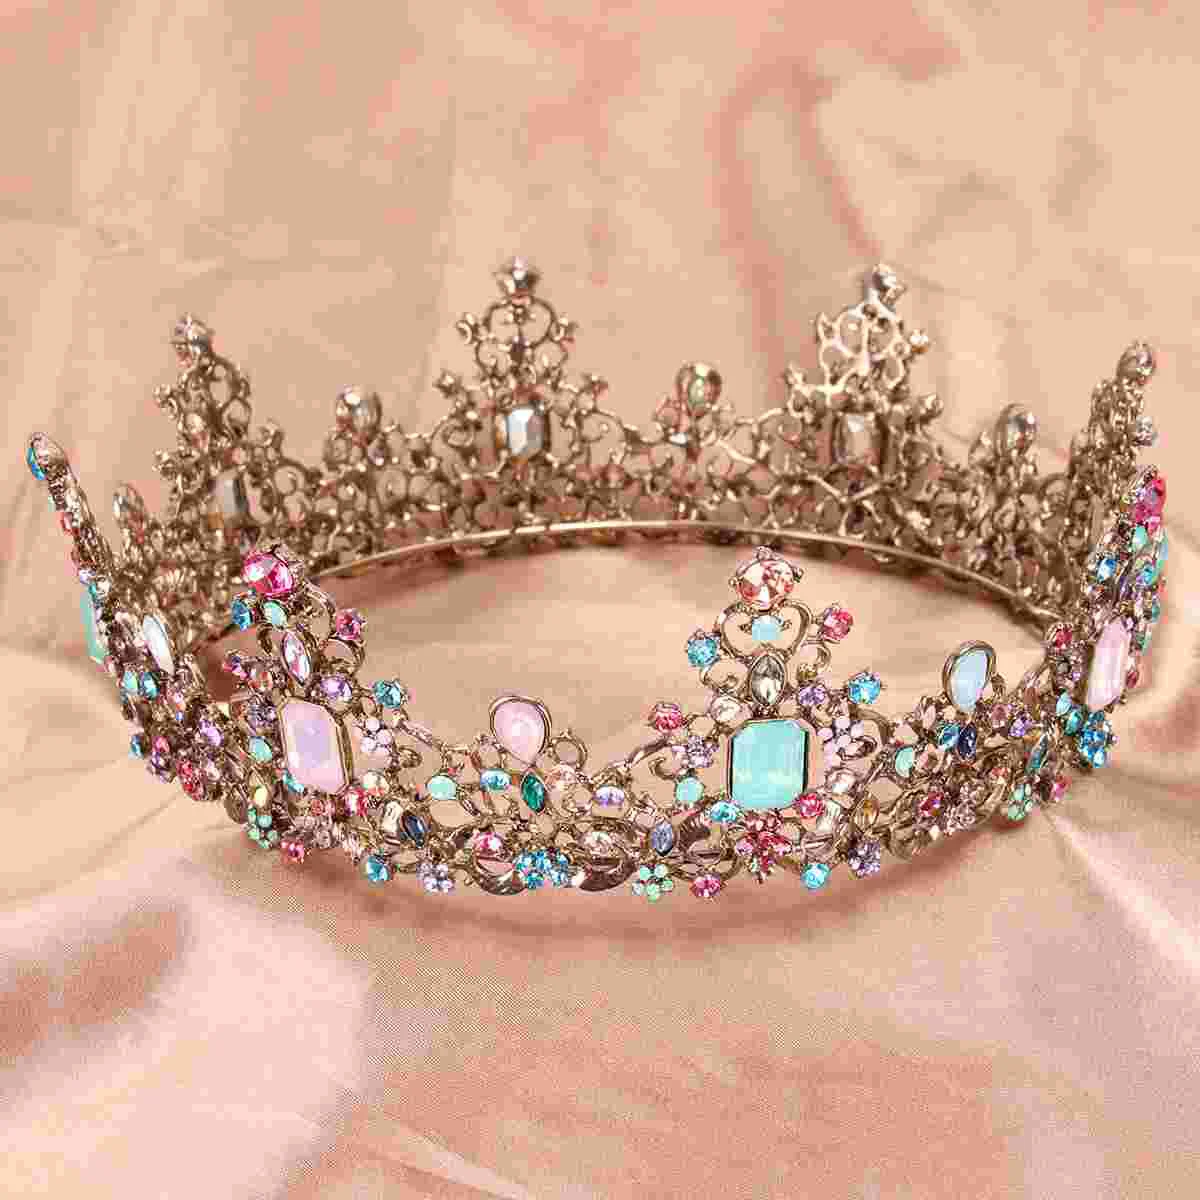 Baroque Royal Crowns and The Crowns for, Rhinestone Costume Party Festival Wedding The Crowns Headbands